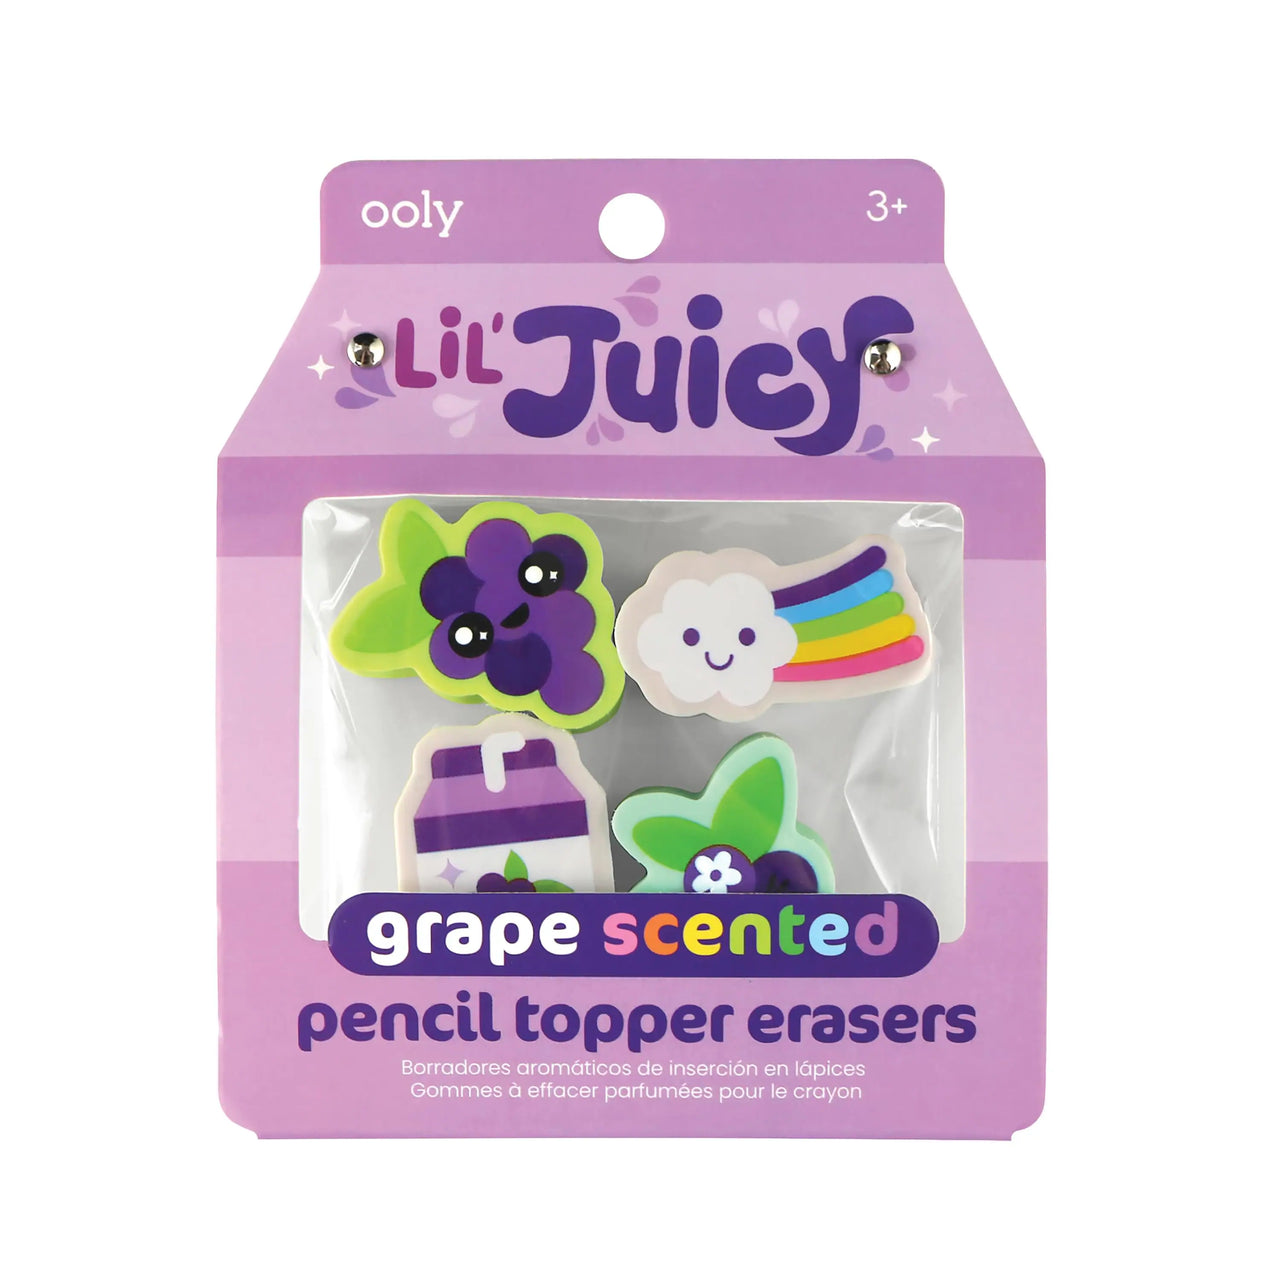 Lil Juicy Grape Scented